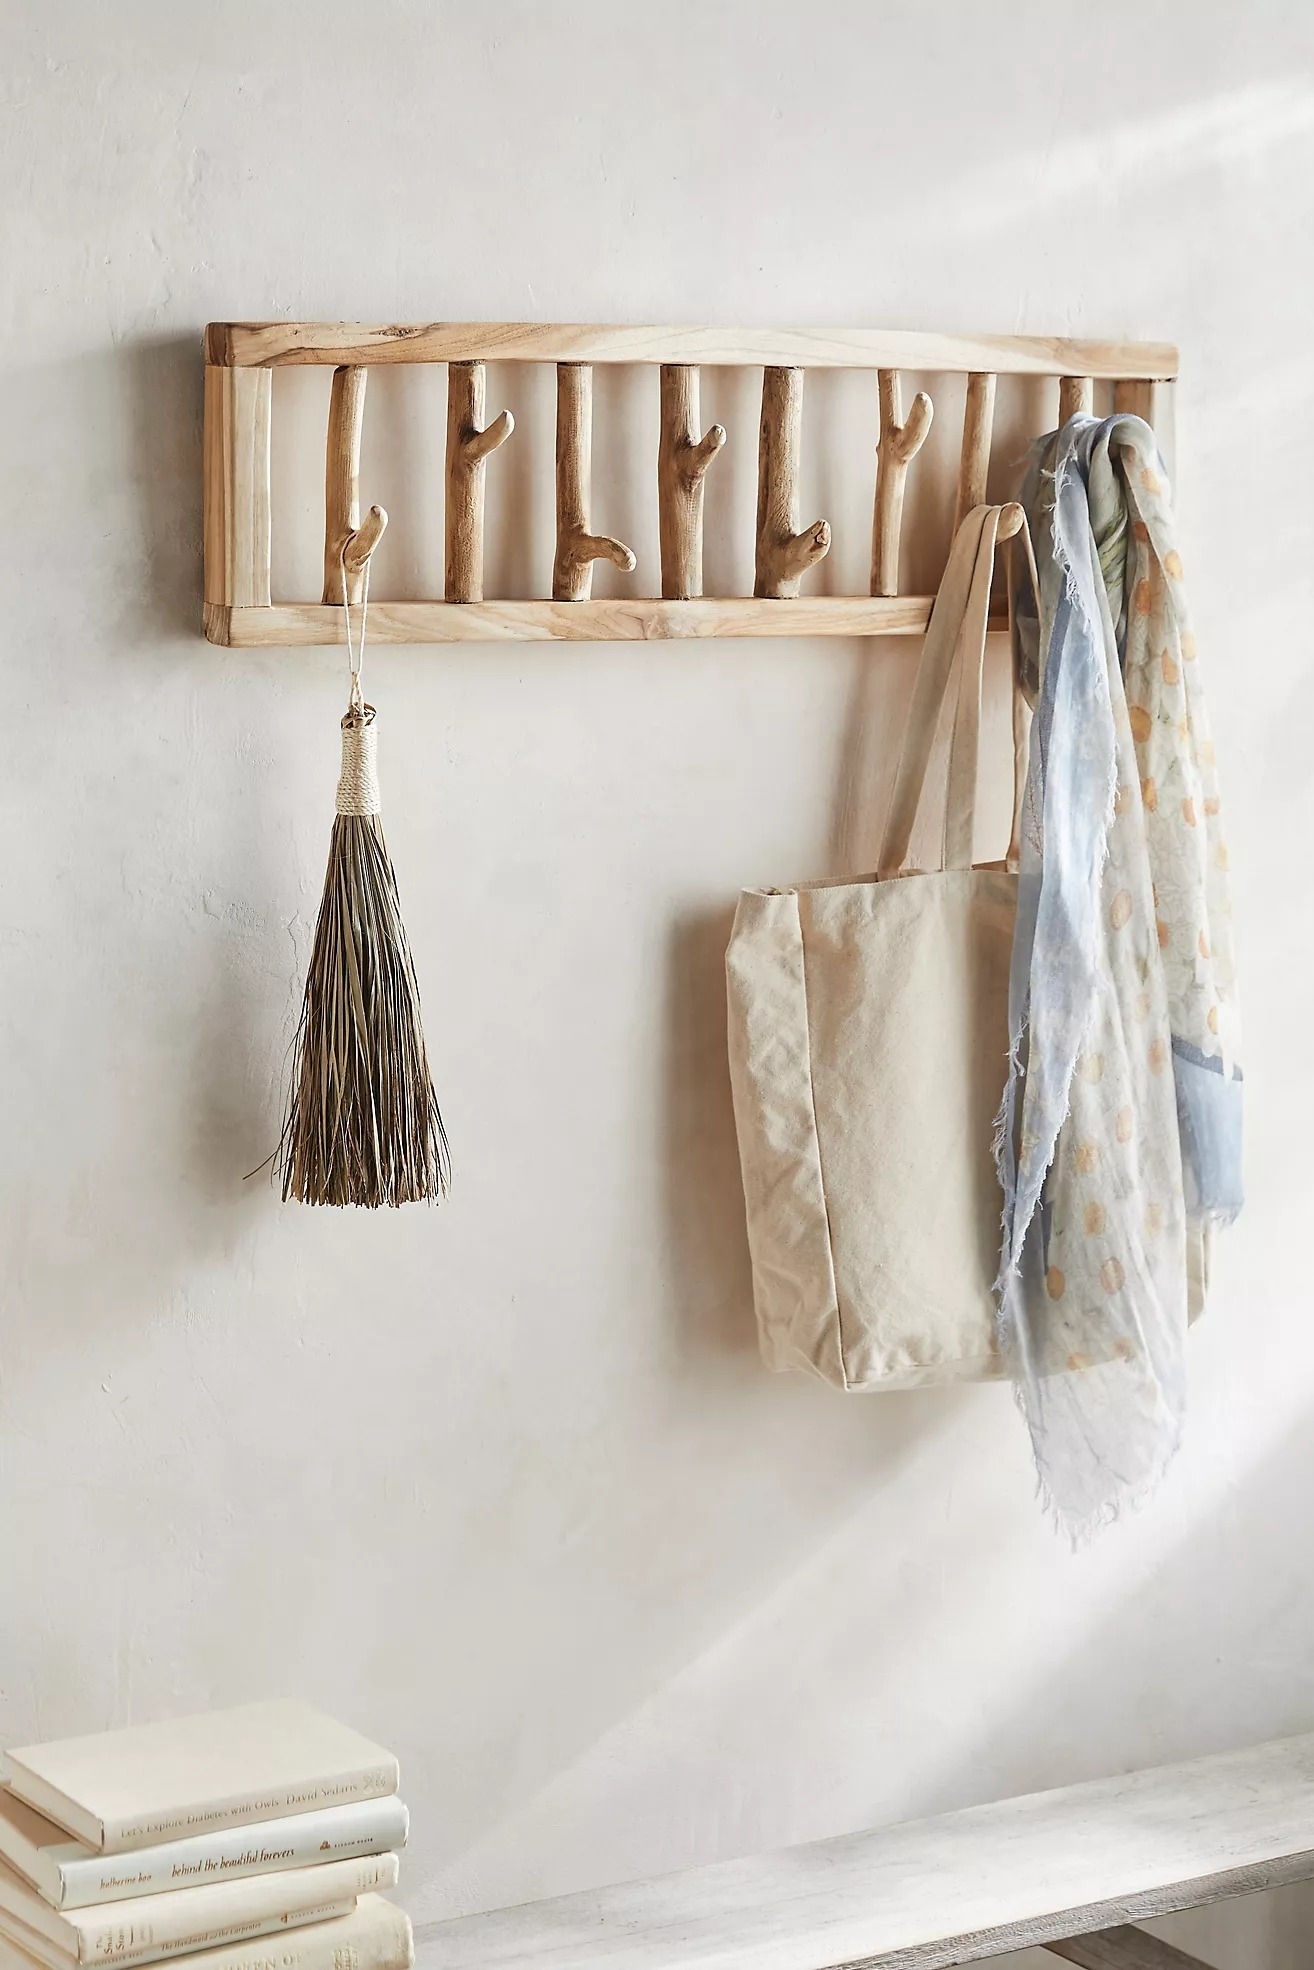 A mounted wall hook rack with accessories